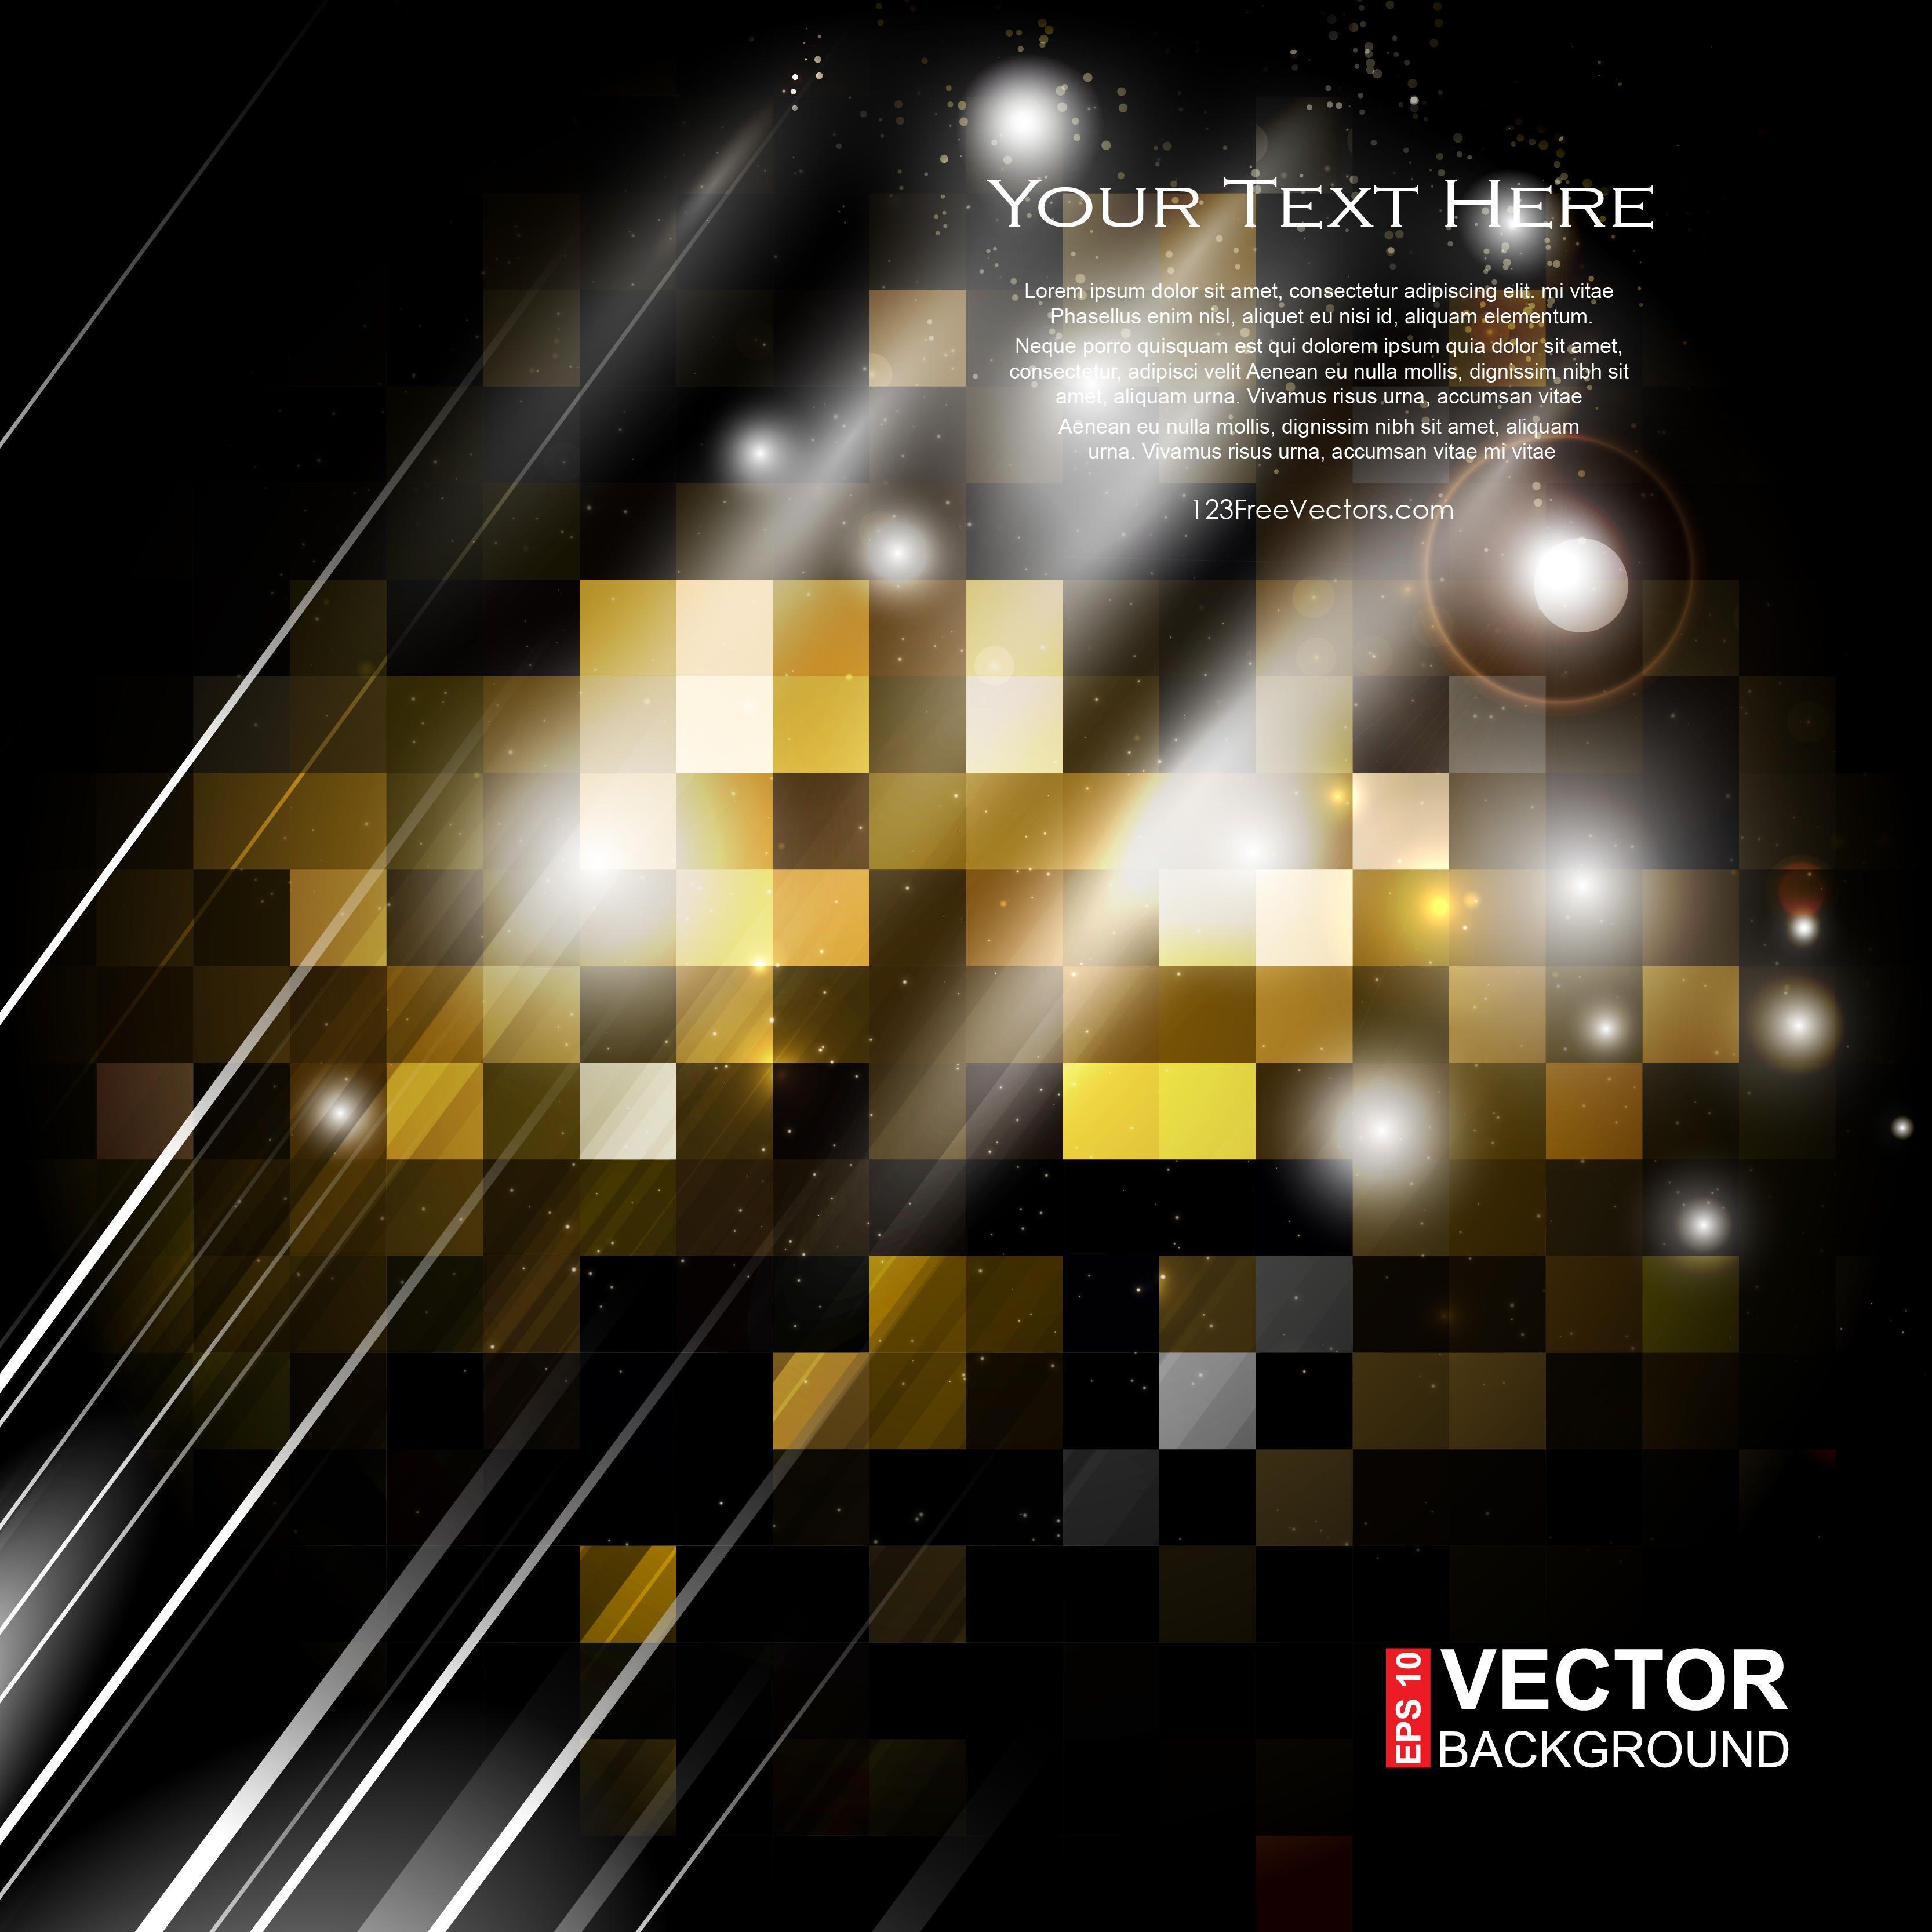 Black Gold Abstract Square Background VectorFreevectors